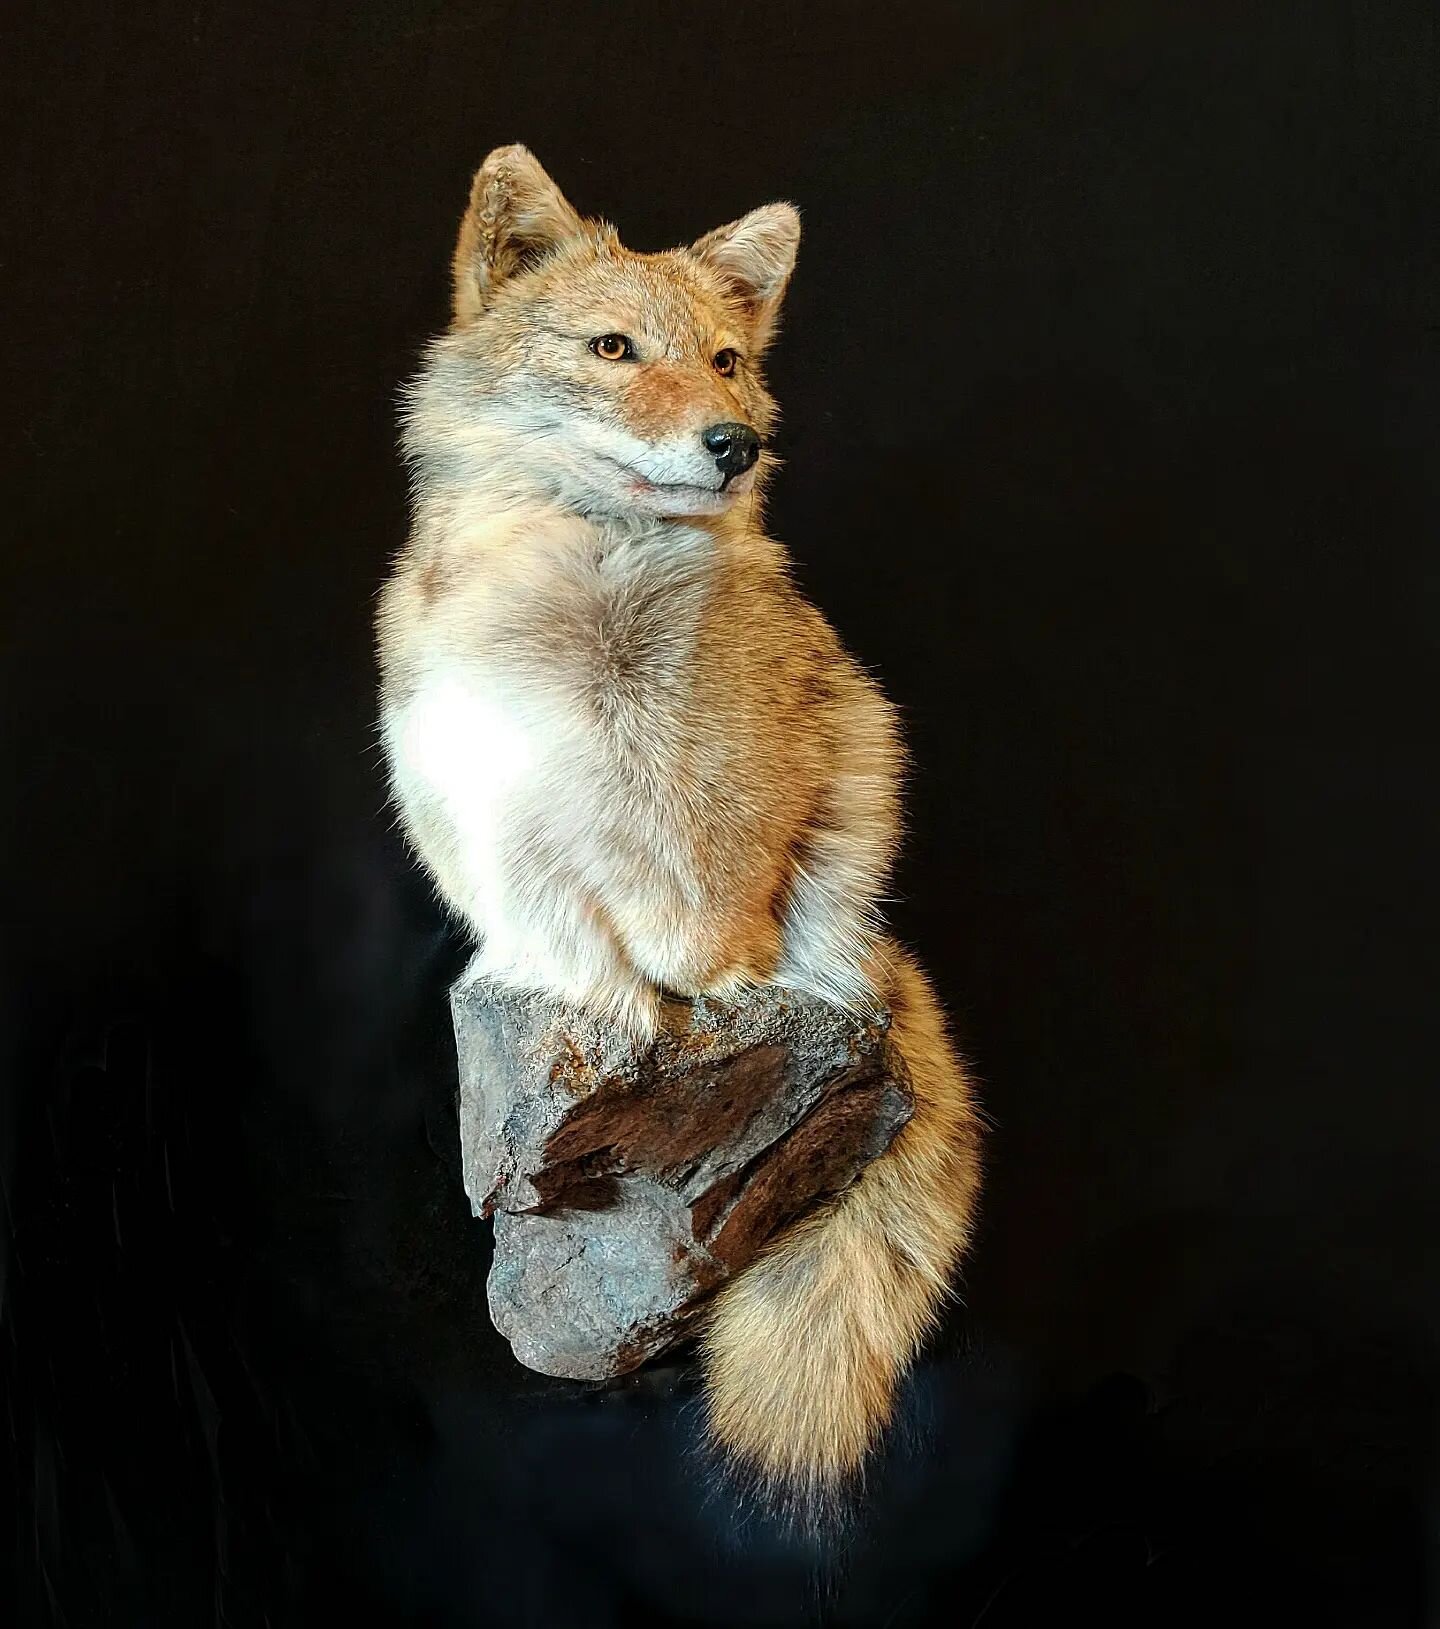 Cool little coyote shoulder mount we recently finished up. #taxidermytuesday #smallmammals #predatorhunting #predator #coyote #taxidermy #mammal #Idaho #varminthunting